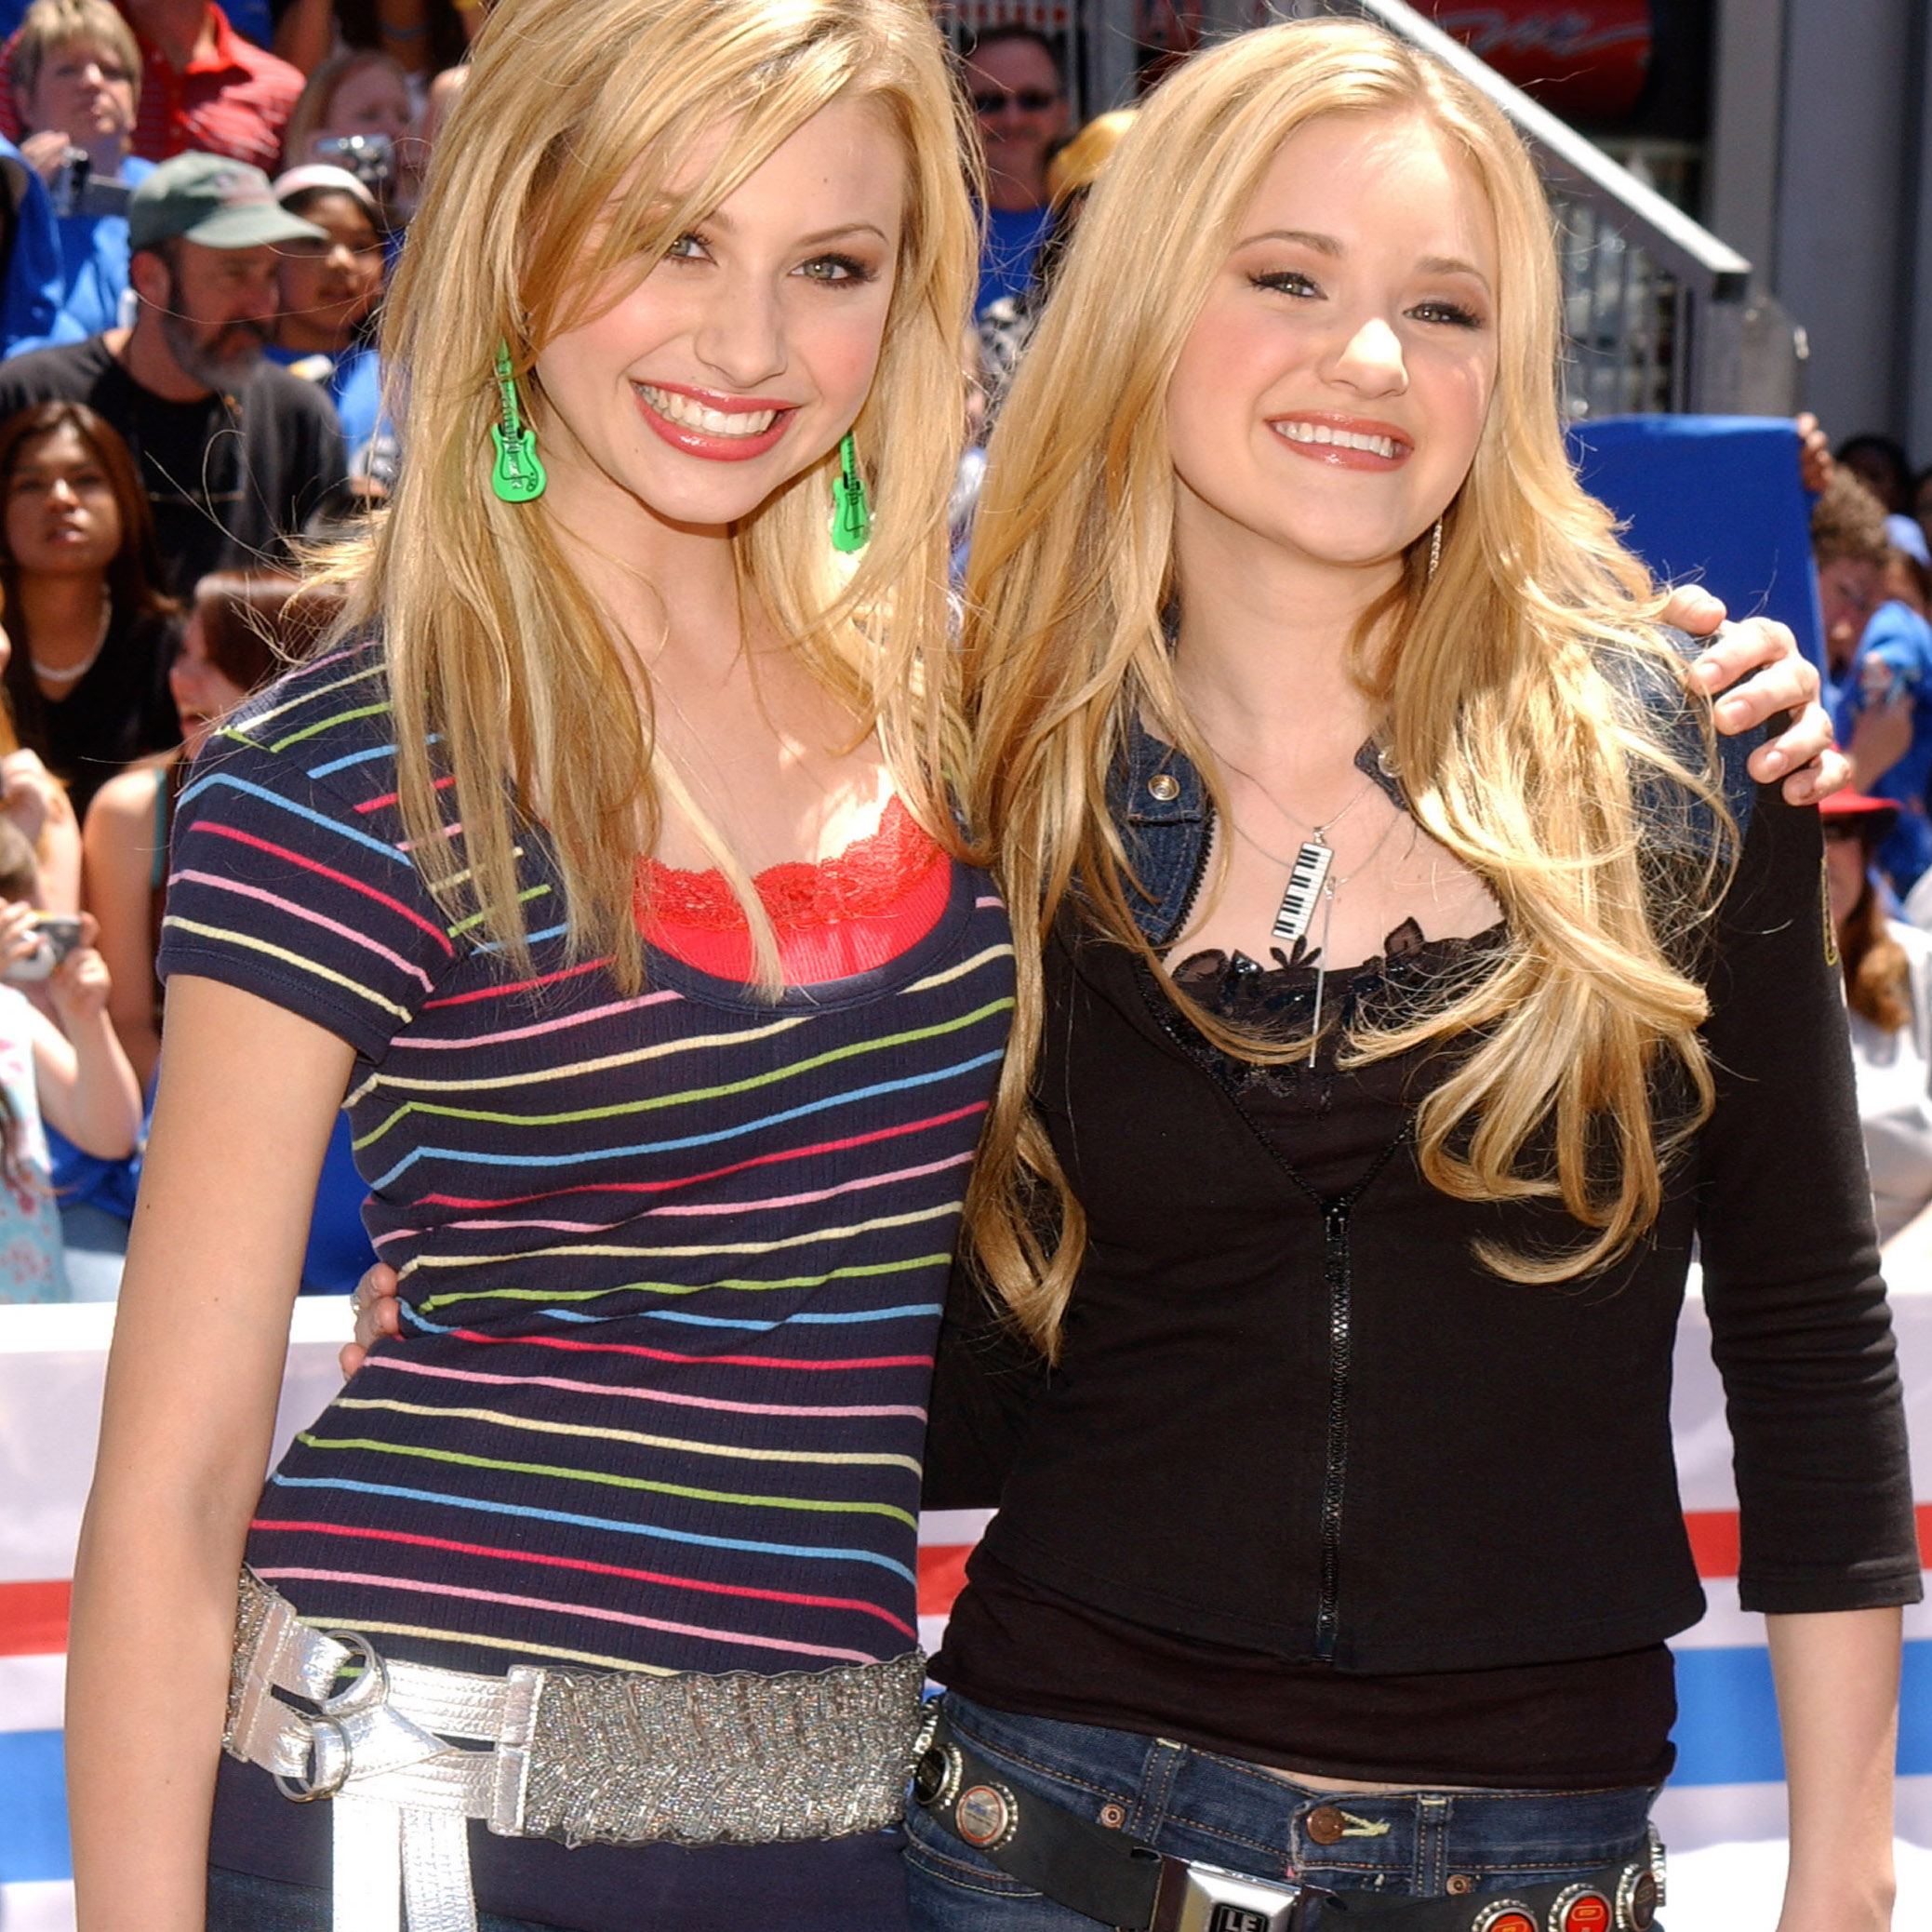 Aly & AJ Ditch 78Violet For New Music - J-14